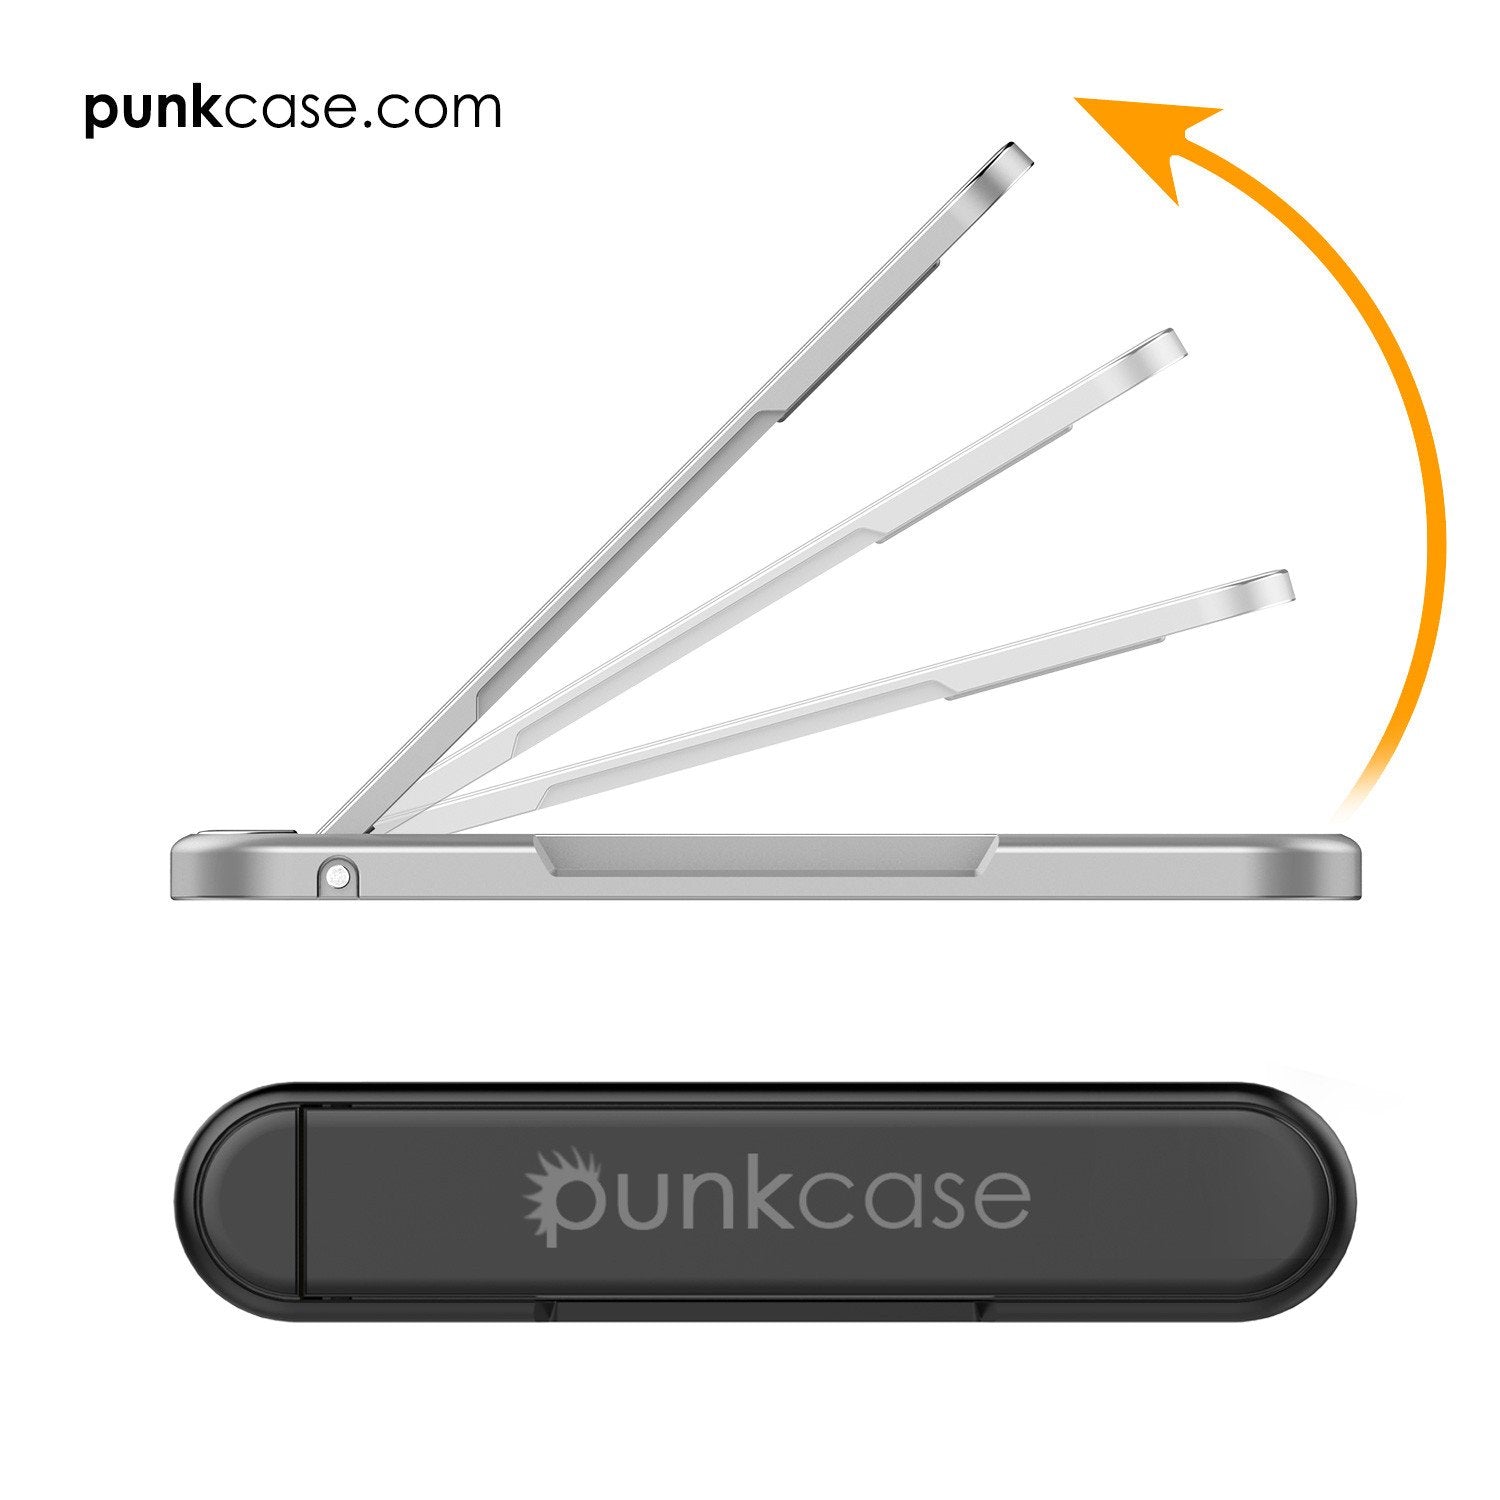 PUNKCASE FlickStick Universal Cell Phone Kickstand for all Mobile Phones & Cases with Flat Backs, One Finger Operation (Black)